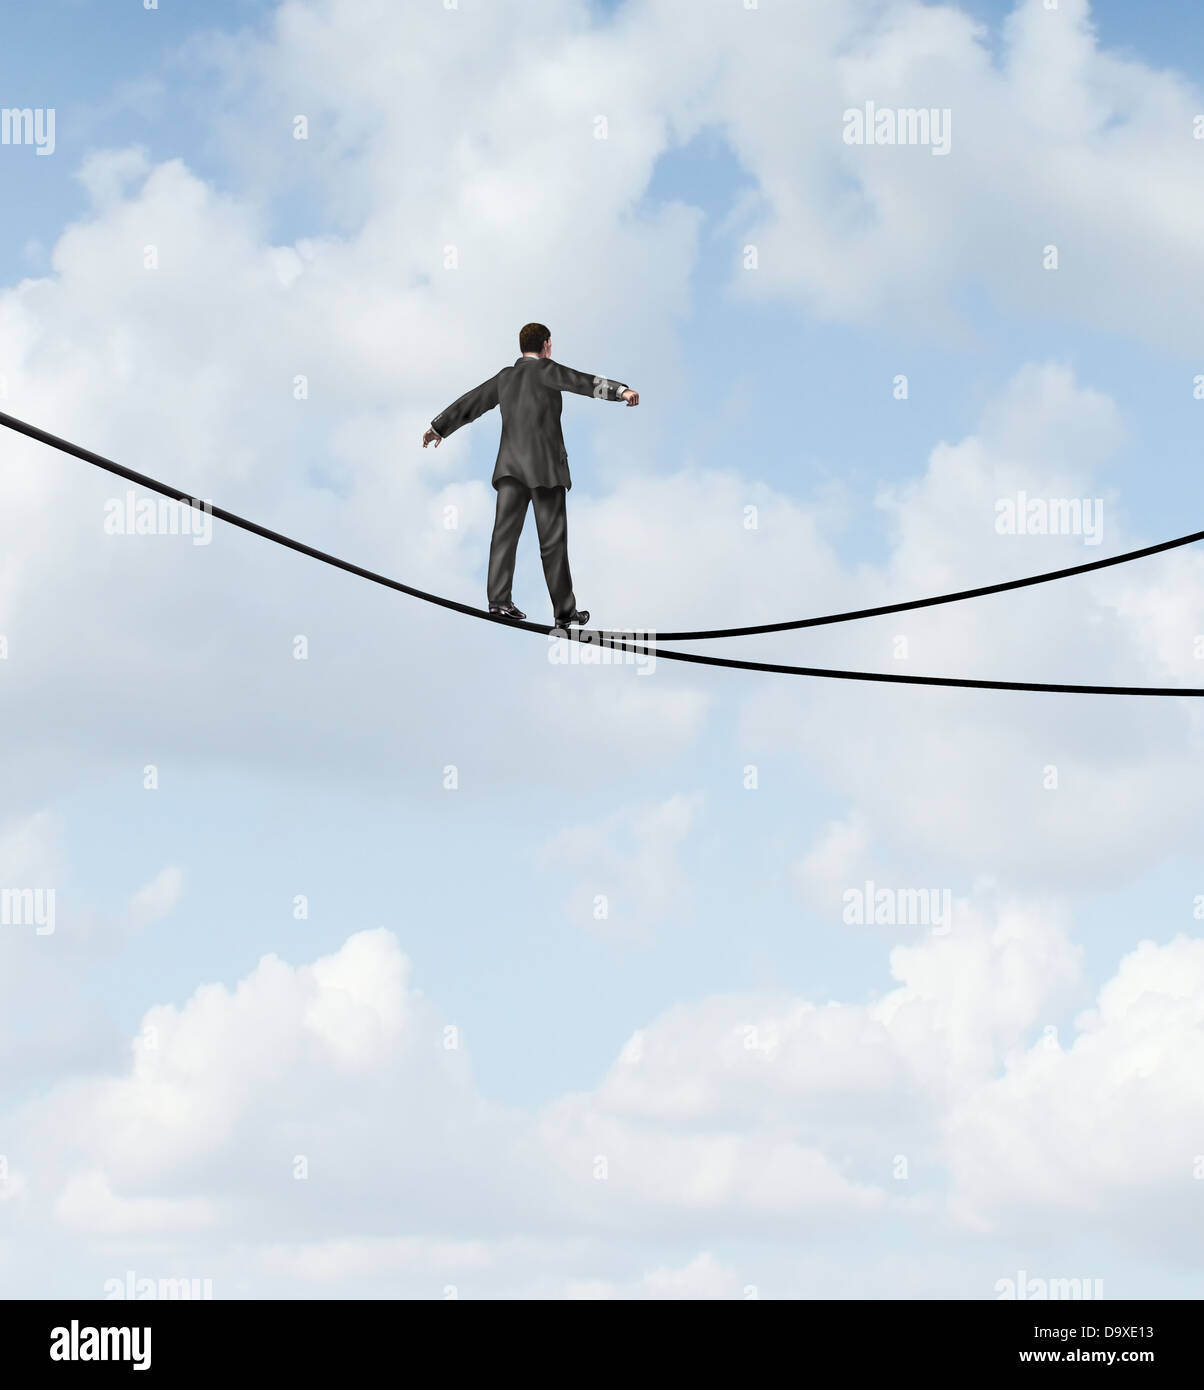 Risky choice business concept with a man walking a dangerous high wire tightrope that is in a crossroads splitting into two opposite directions as a symbol of strategy dilemma deciding on the best path. Stock Photo